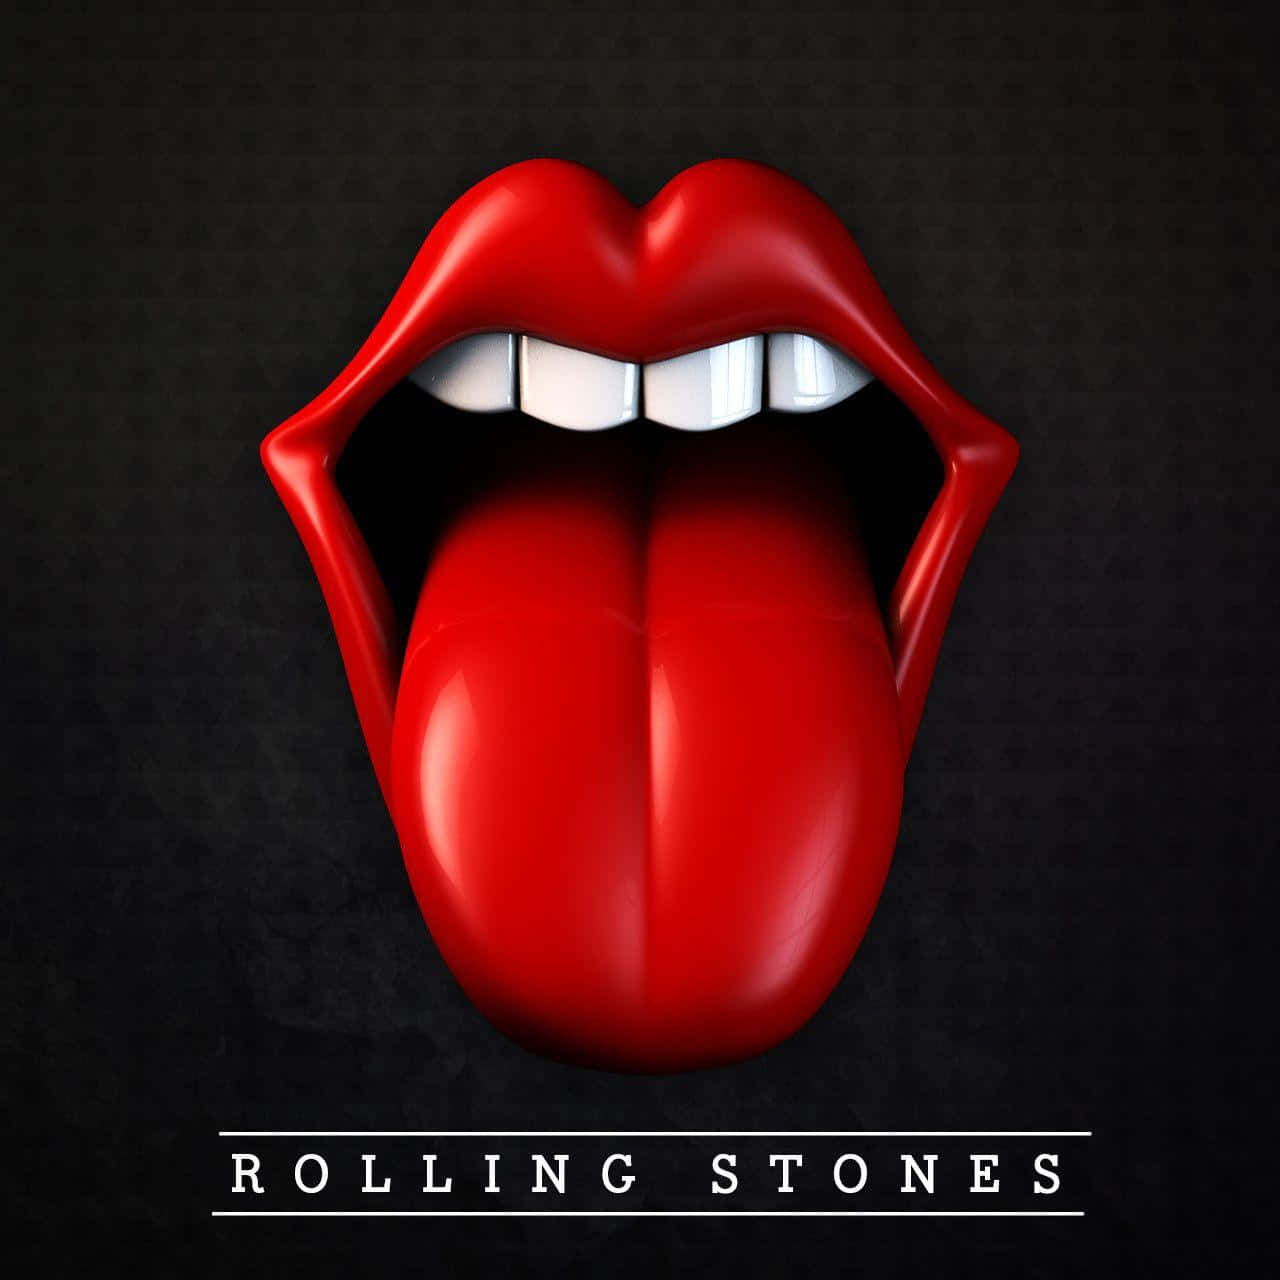 Rolling Stones Logo Tongue Out Background